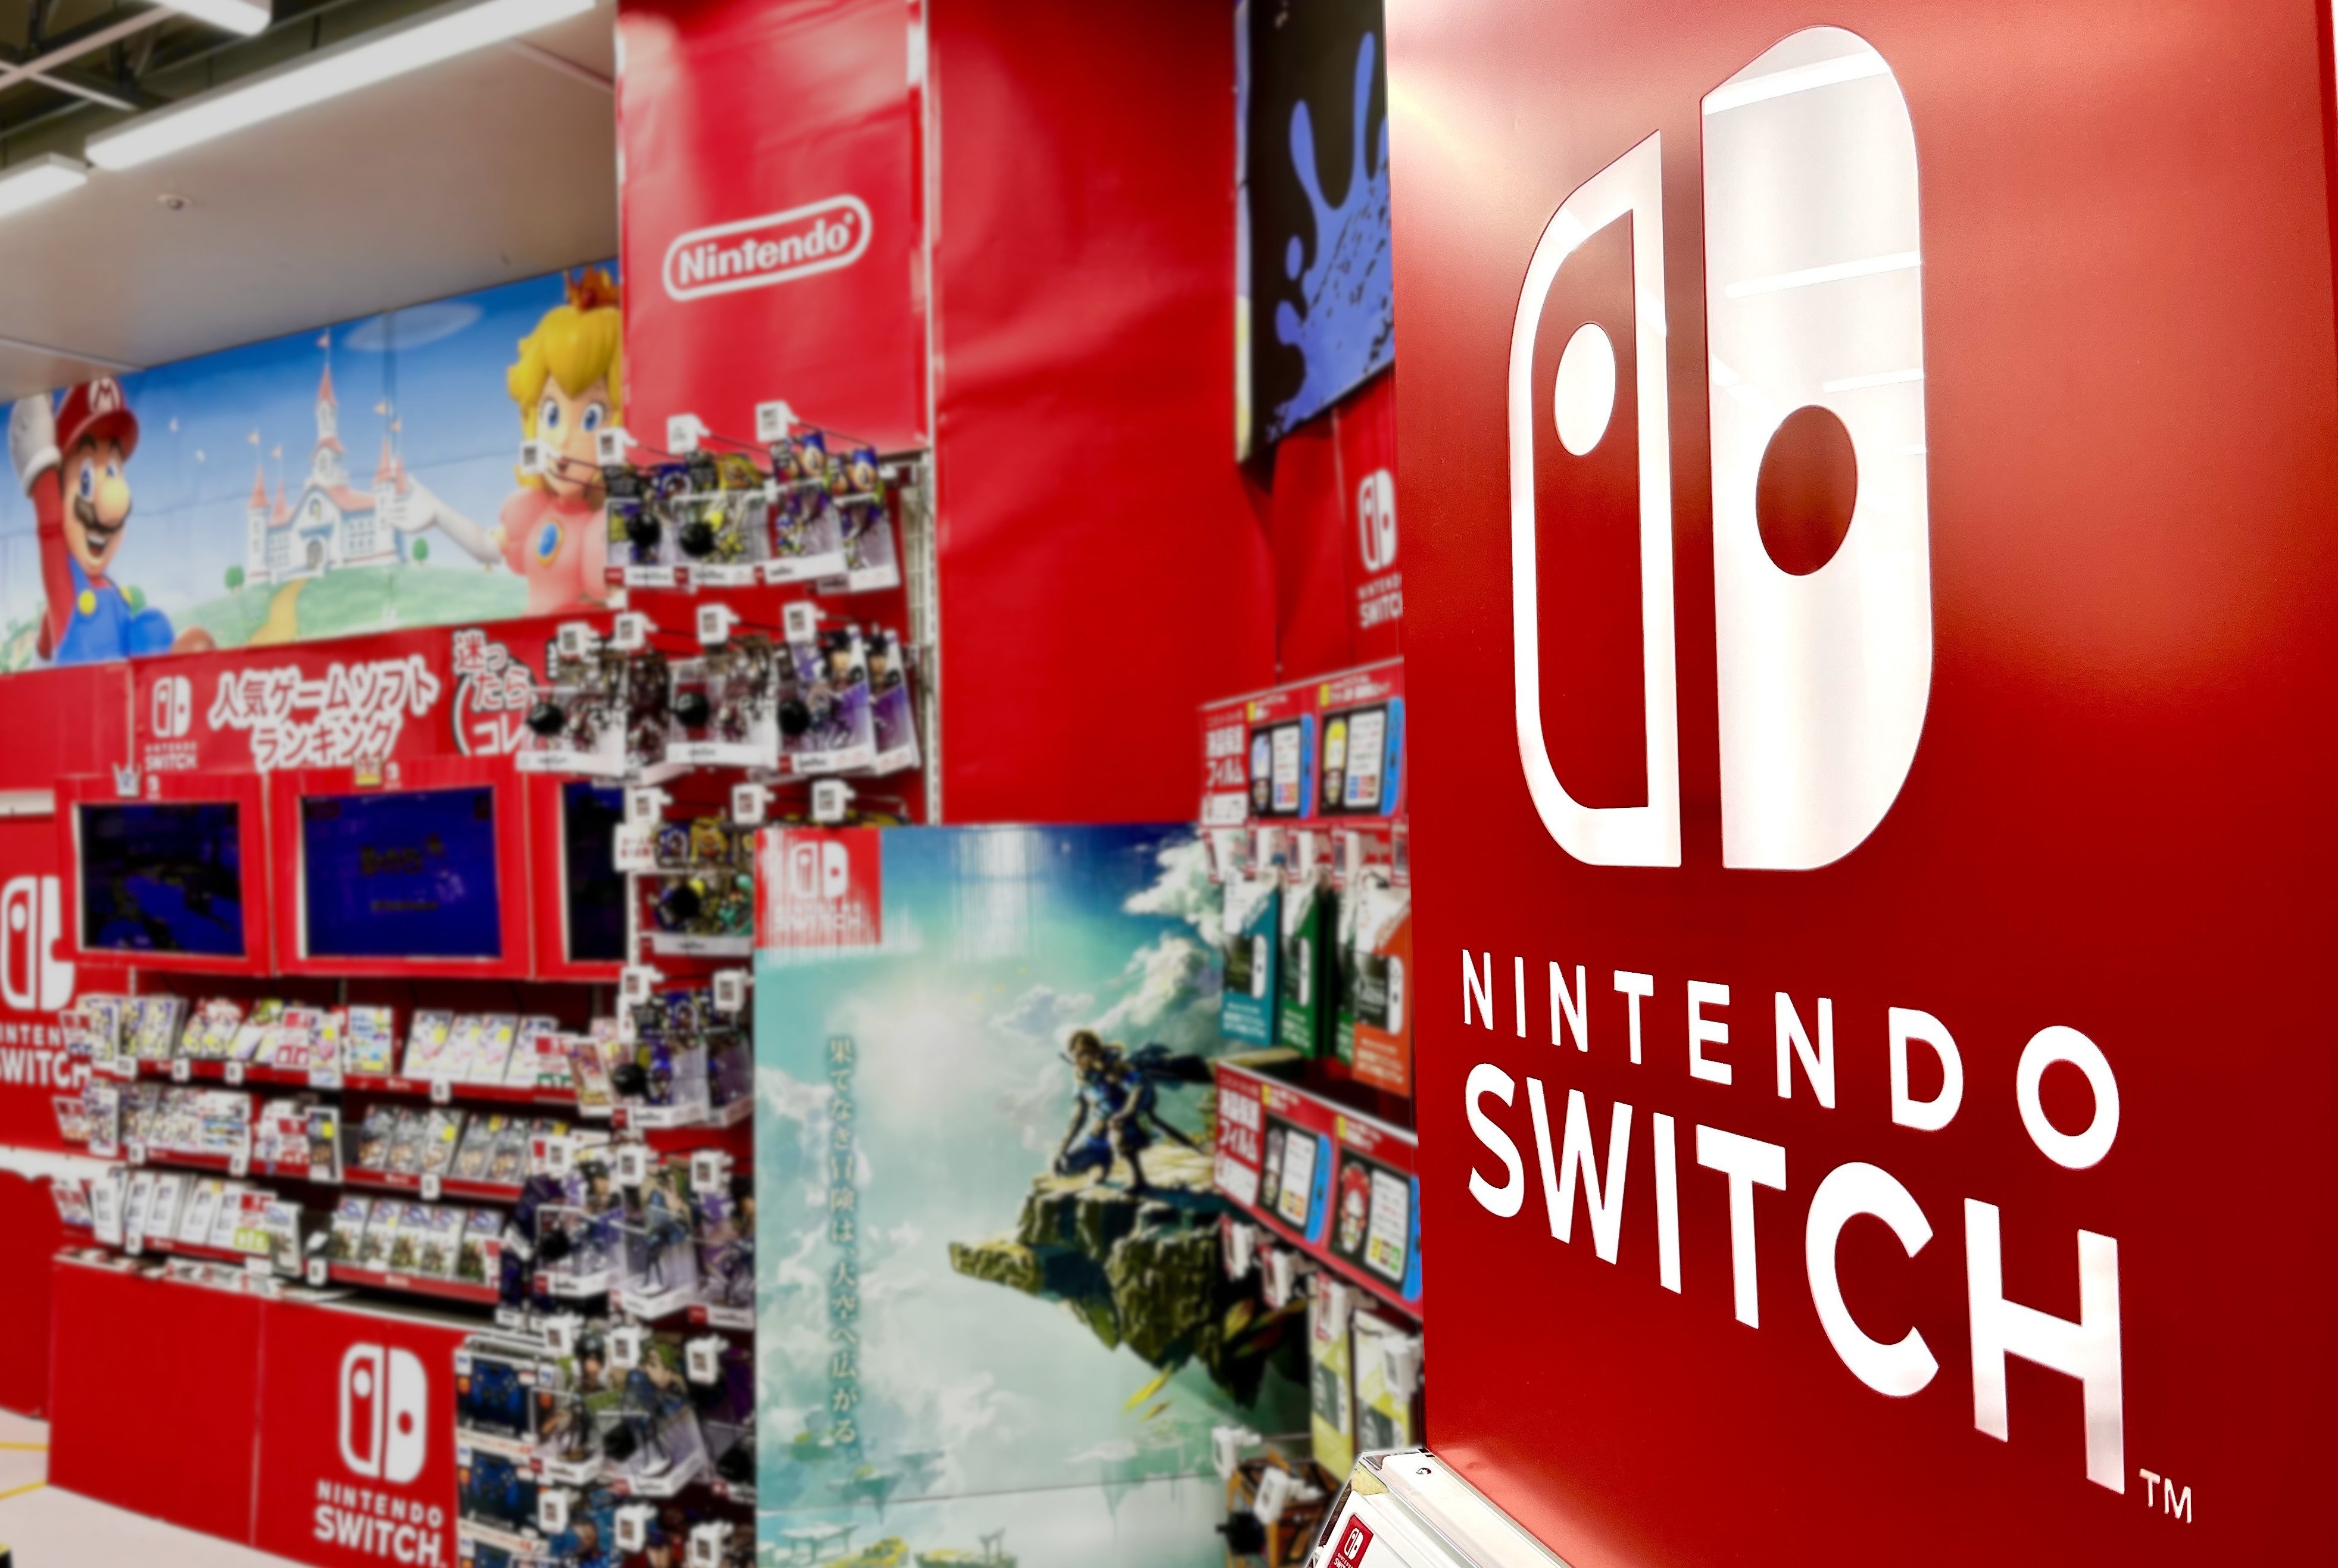 Nintendo ups its Switch game with big OLED screen - Nikkei Asia